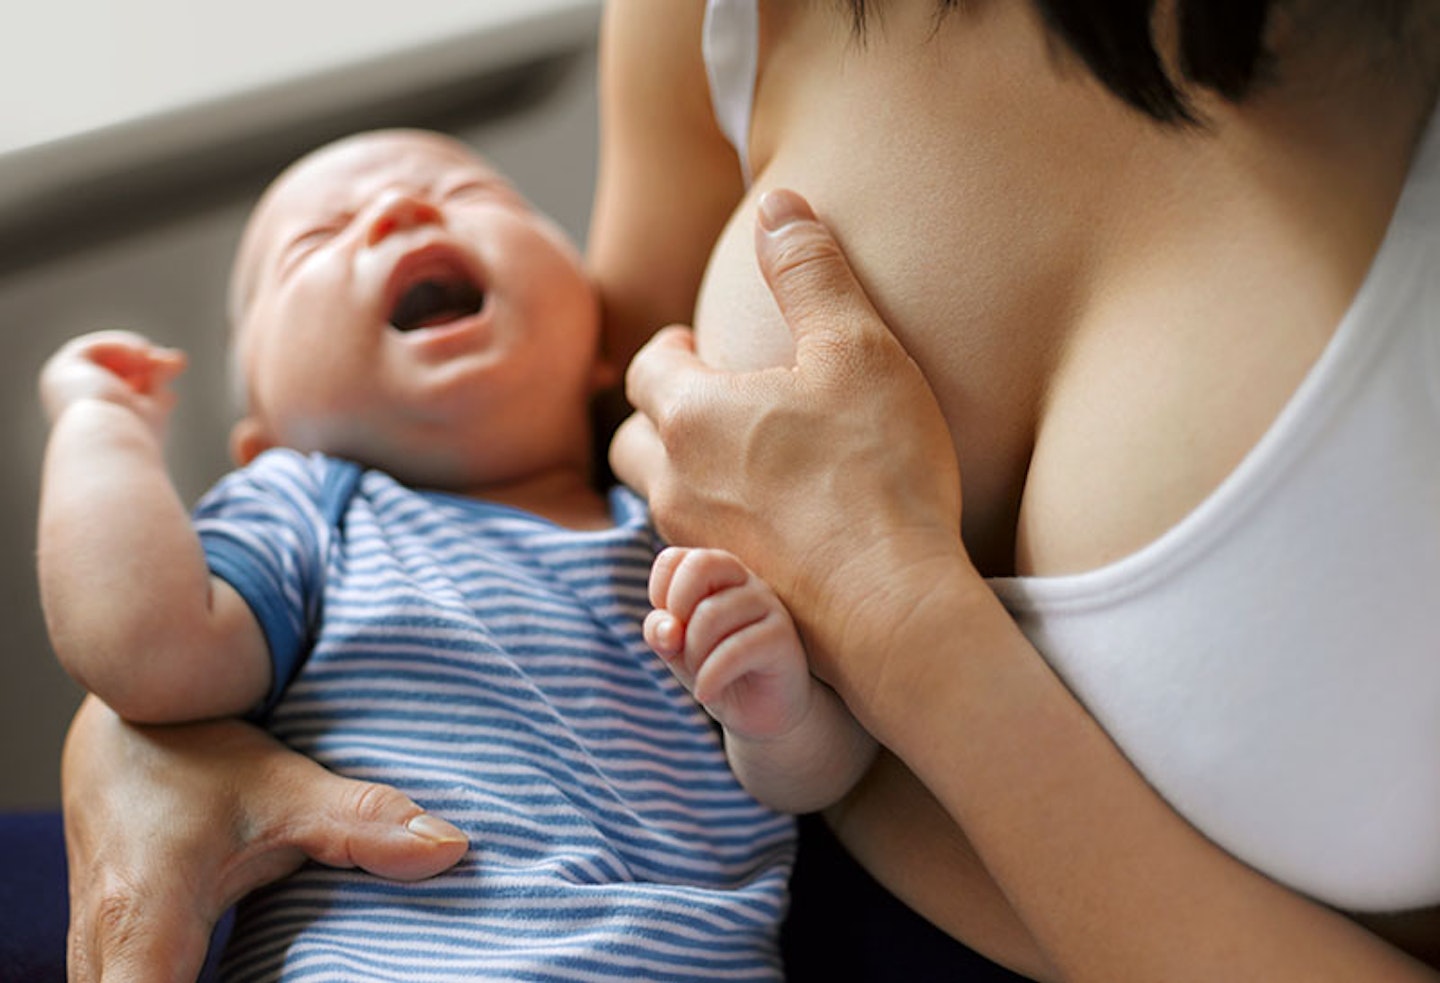 How to deal with breastfeeding pain